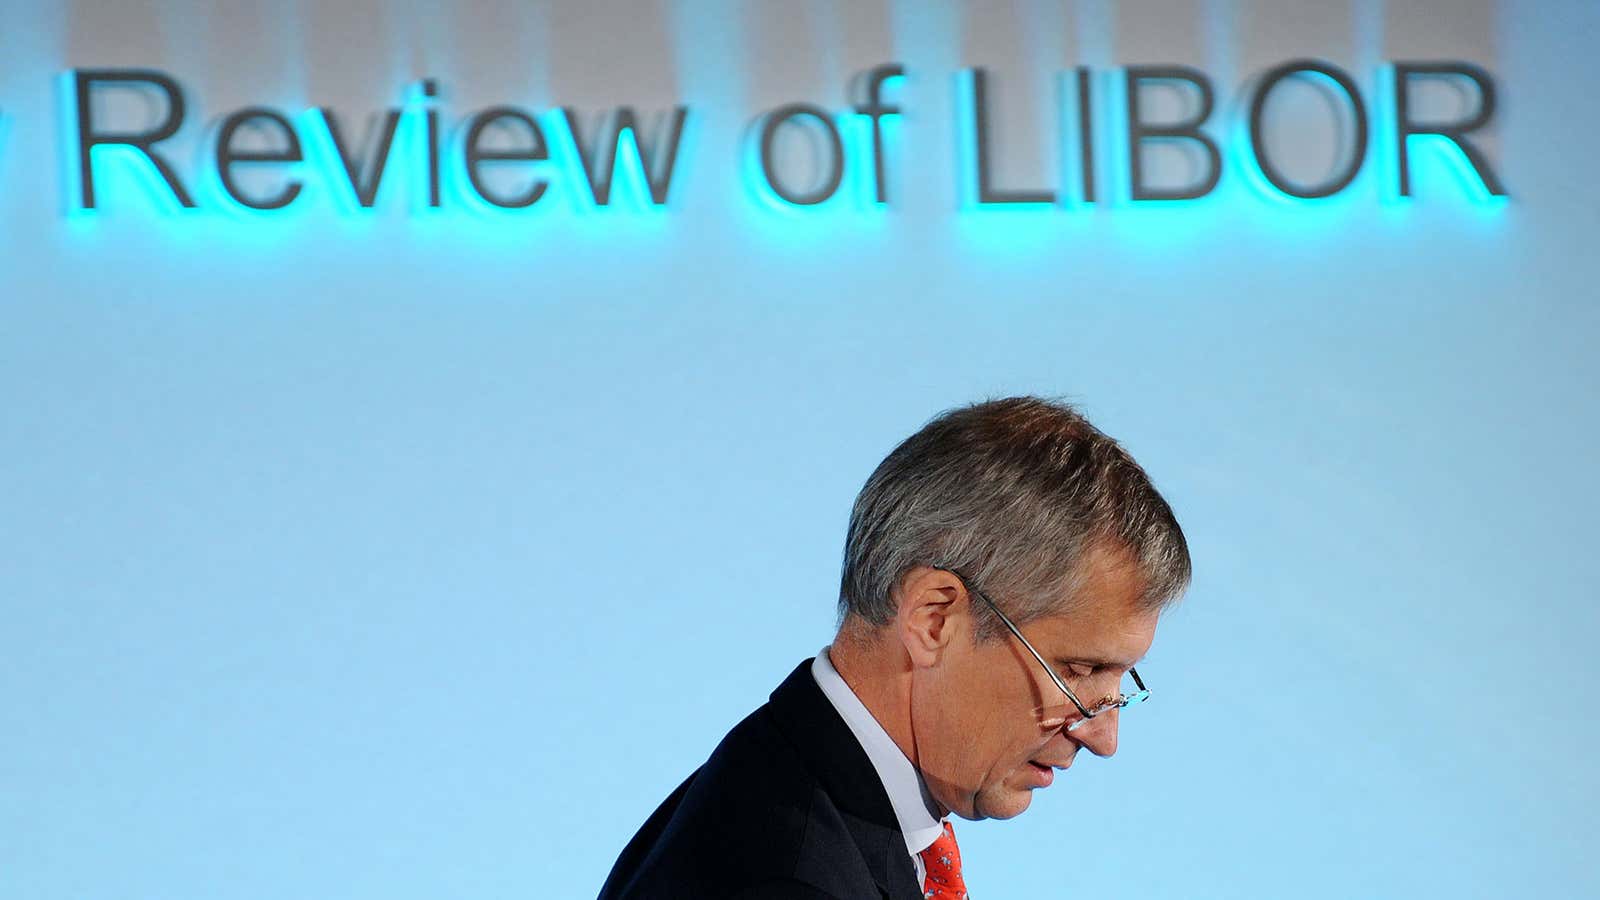 This is how the LIBOR scandal just got (mostly) resolved